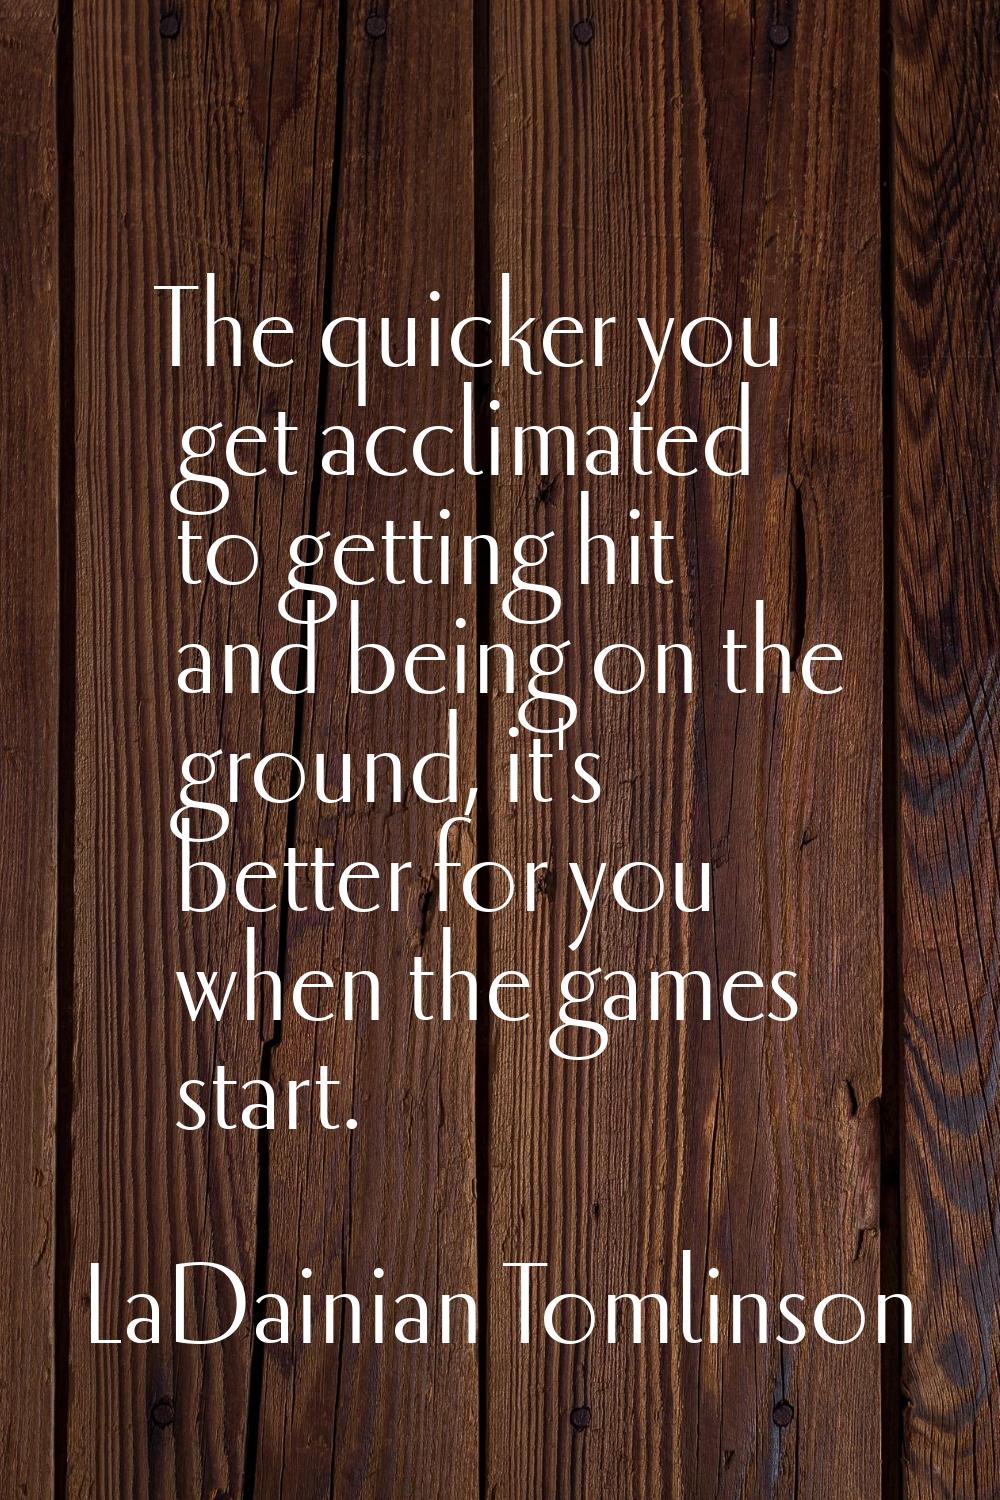 The quicker you get acclimated to getting hit and being on the ground, it's better for you when the